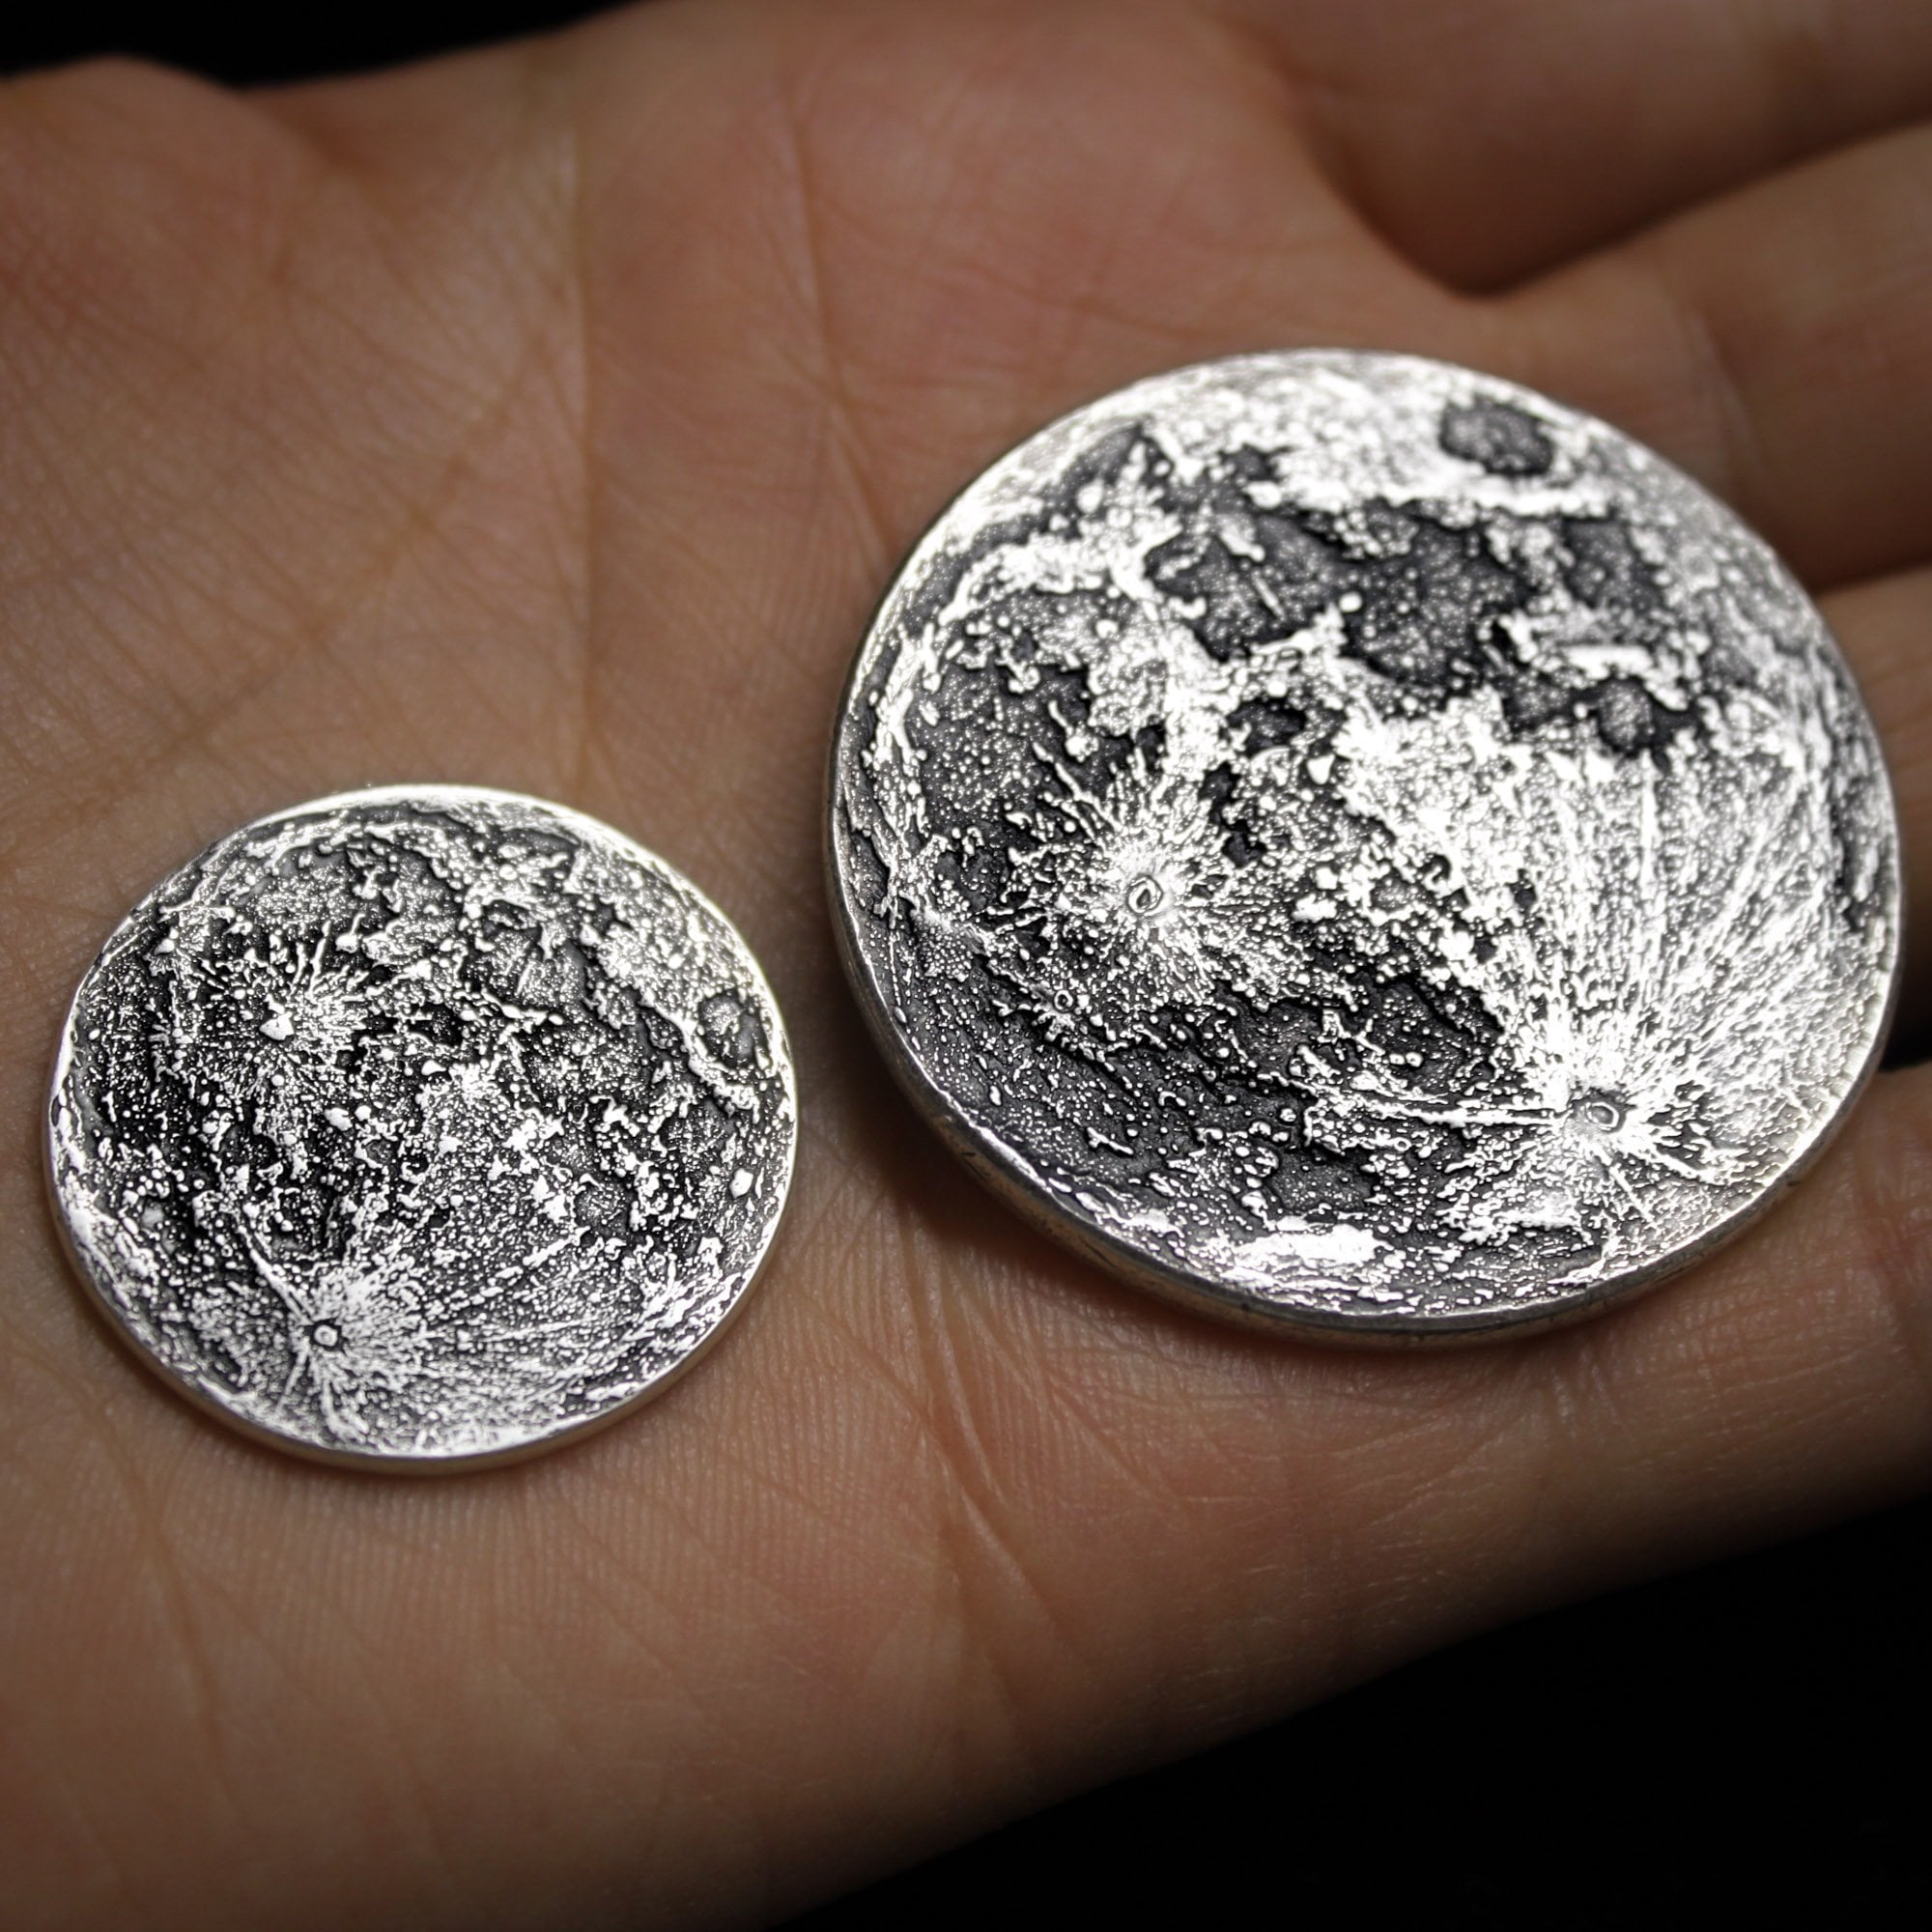 Full Moon Coin in 1/4 oz and 1 troy oz 999 fine Silver by Shire Post Mint